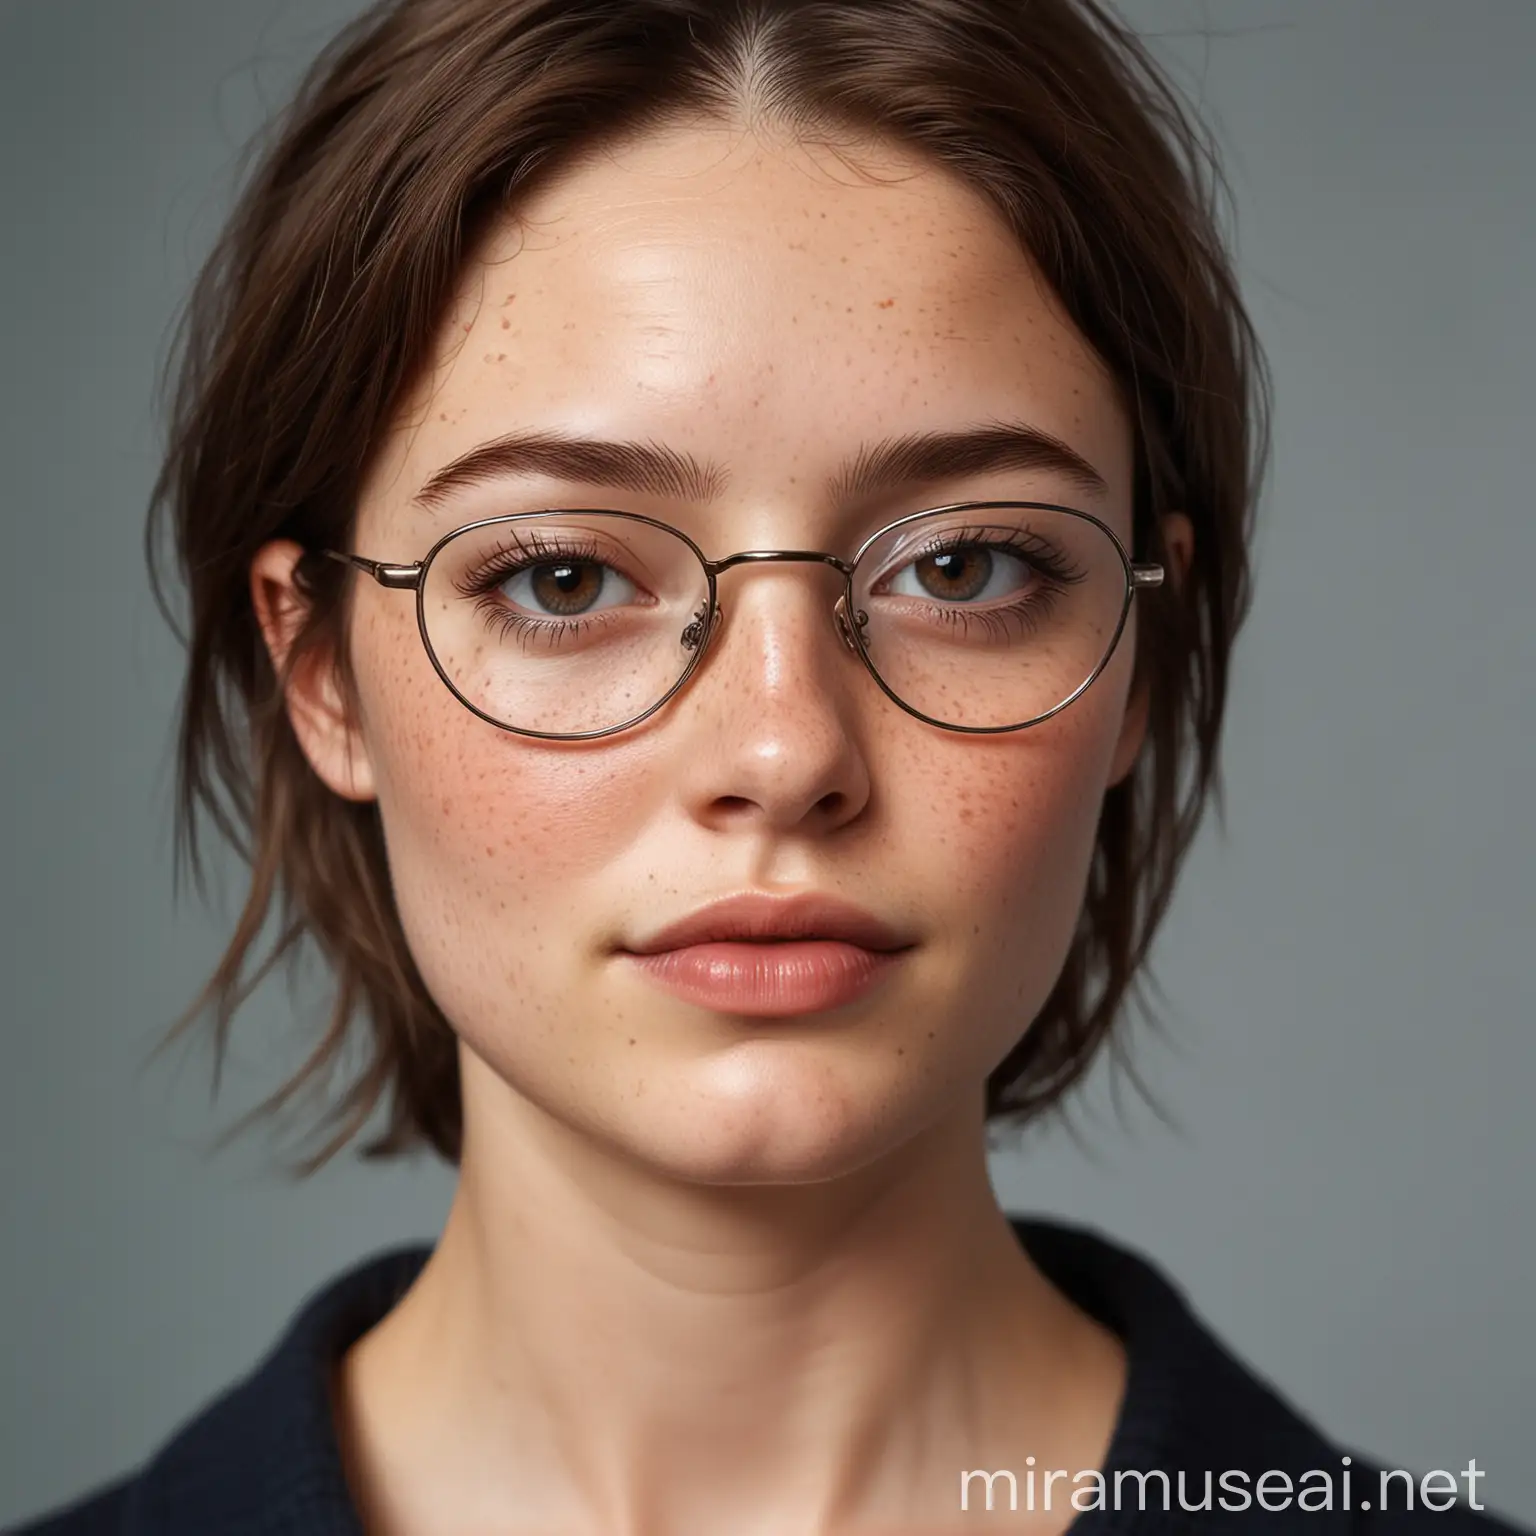 Portrait of a Young Woman with Freckles and Aviator Glasses